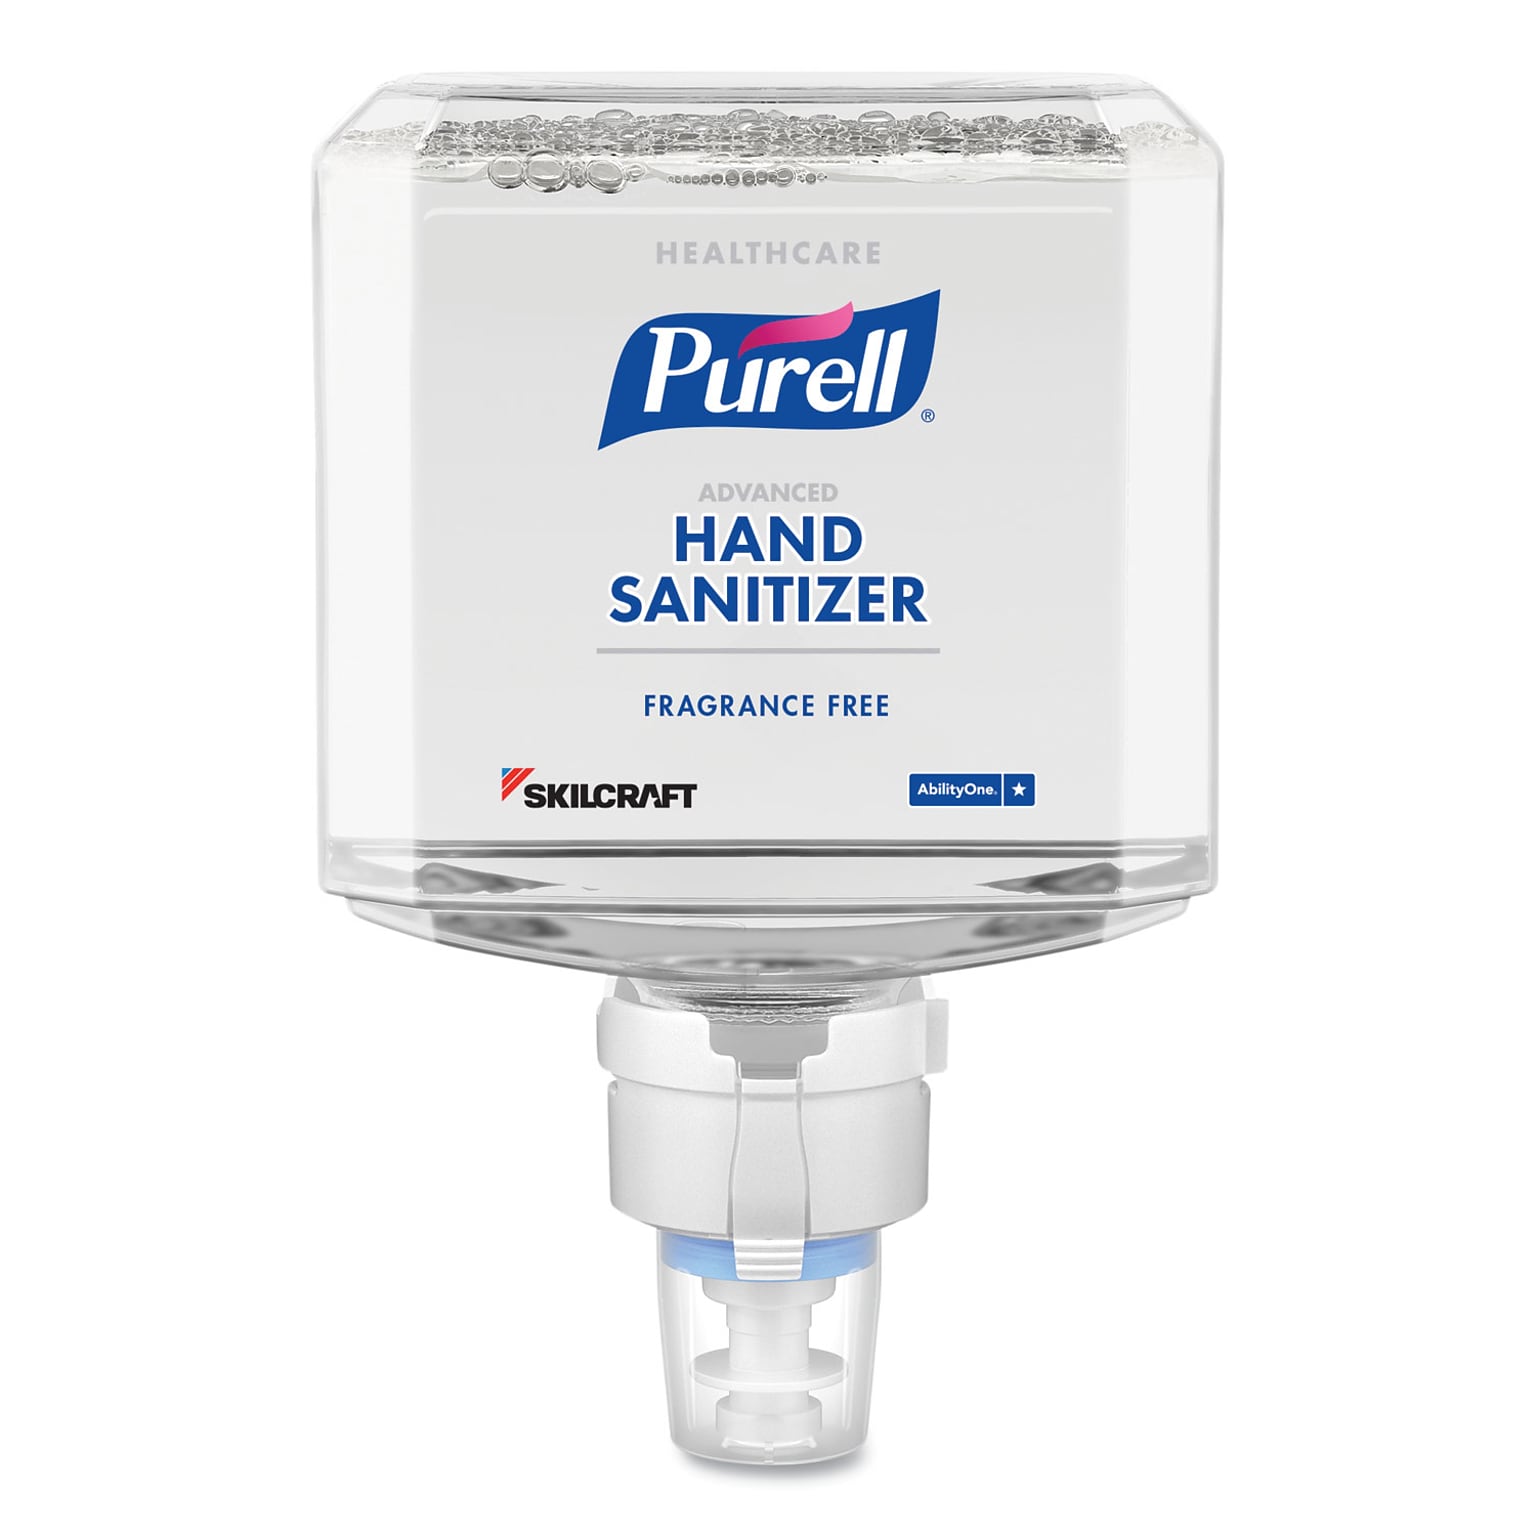 AbilityOne® 6508016941820 SKILCRAFT PURELL Healthcare Gentle and Free Foam Hand Sanitizer Refill, 1,200 mL, Unscented, 2/Box